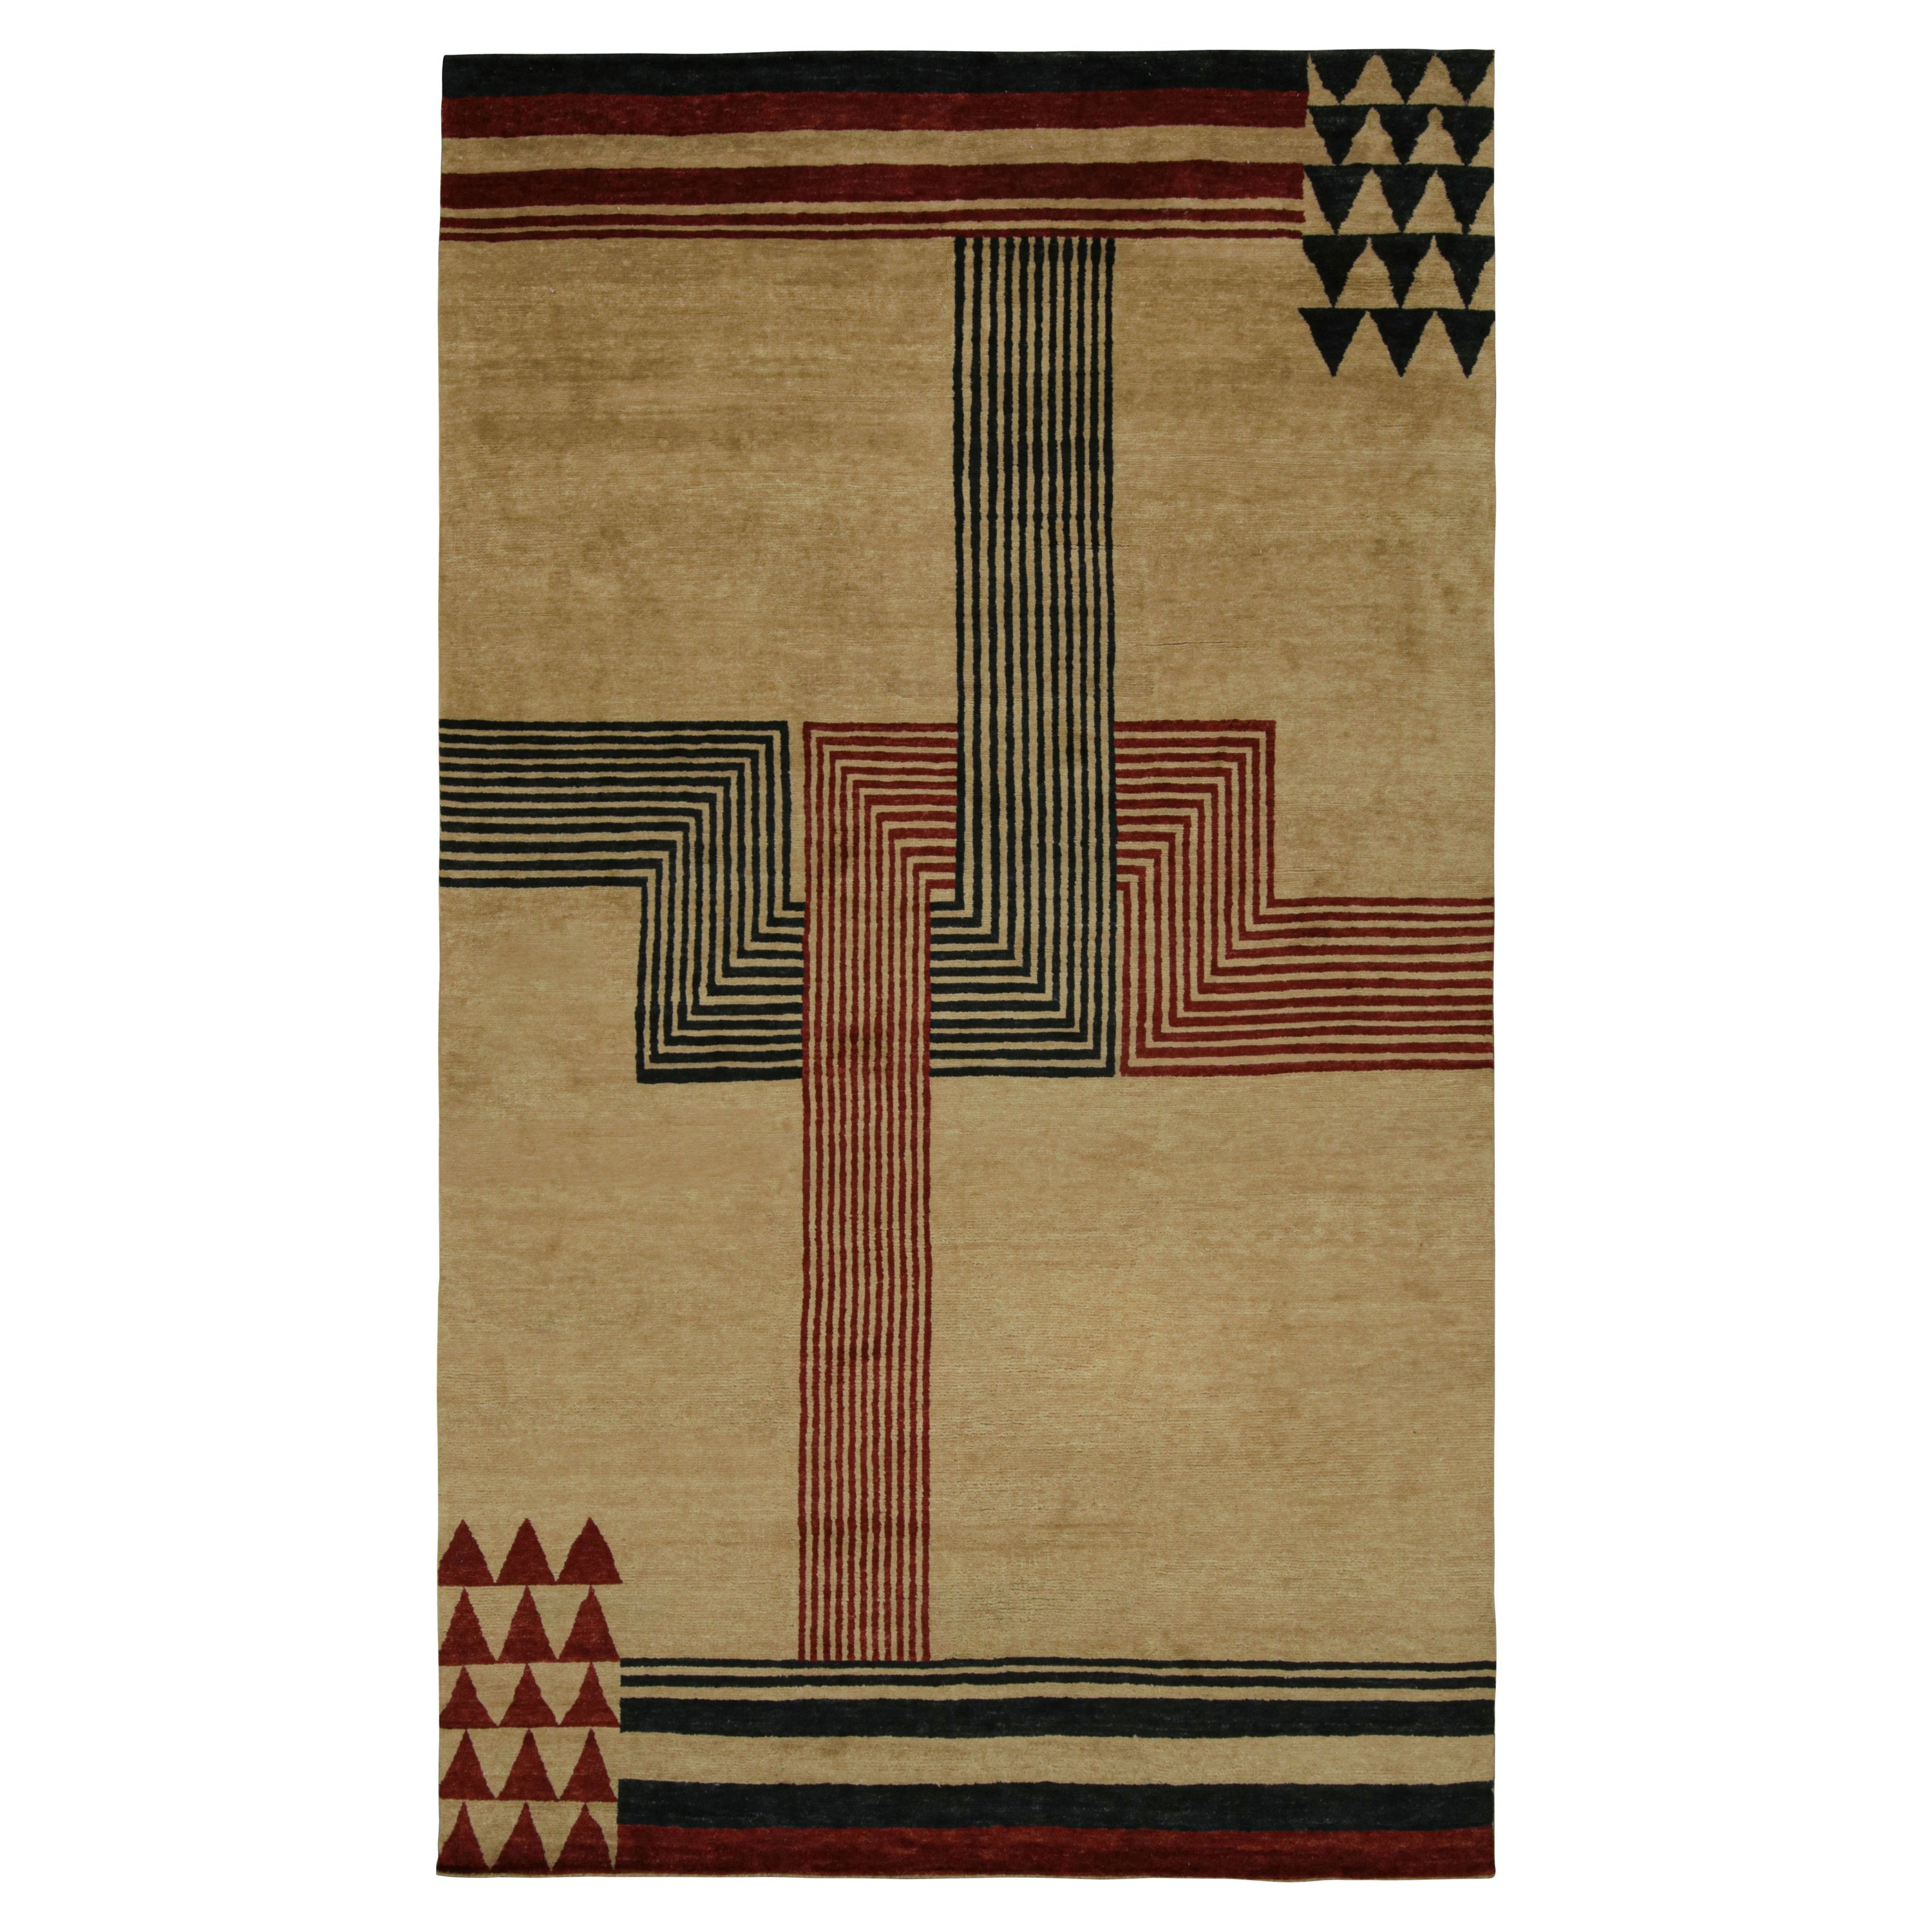 Rug & Kilim’s Modern French Art Deco Style Rug with Rectilinear Geometric For Sale